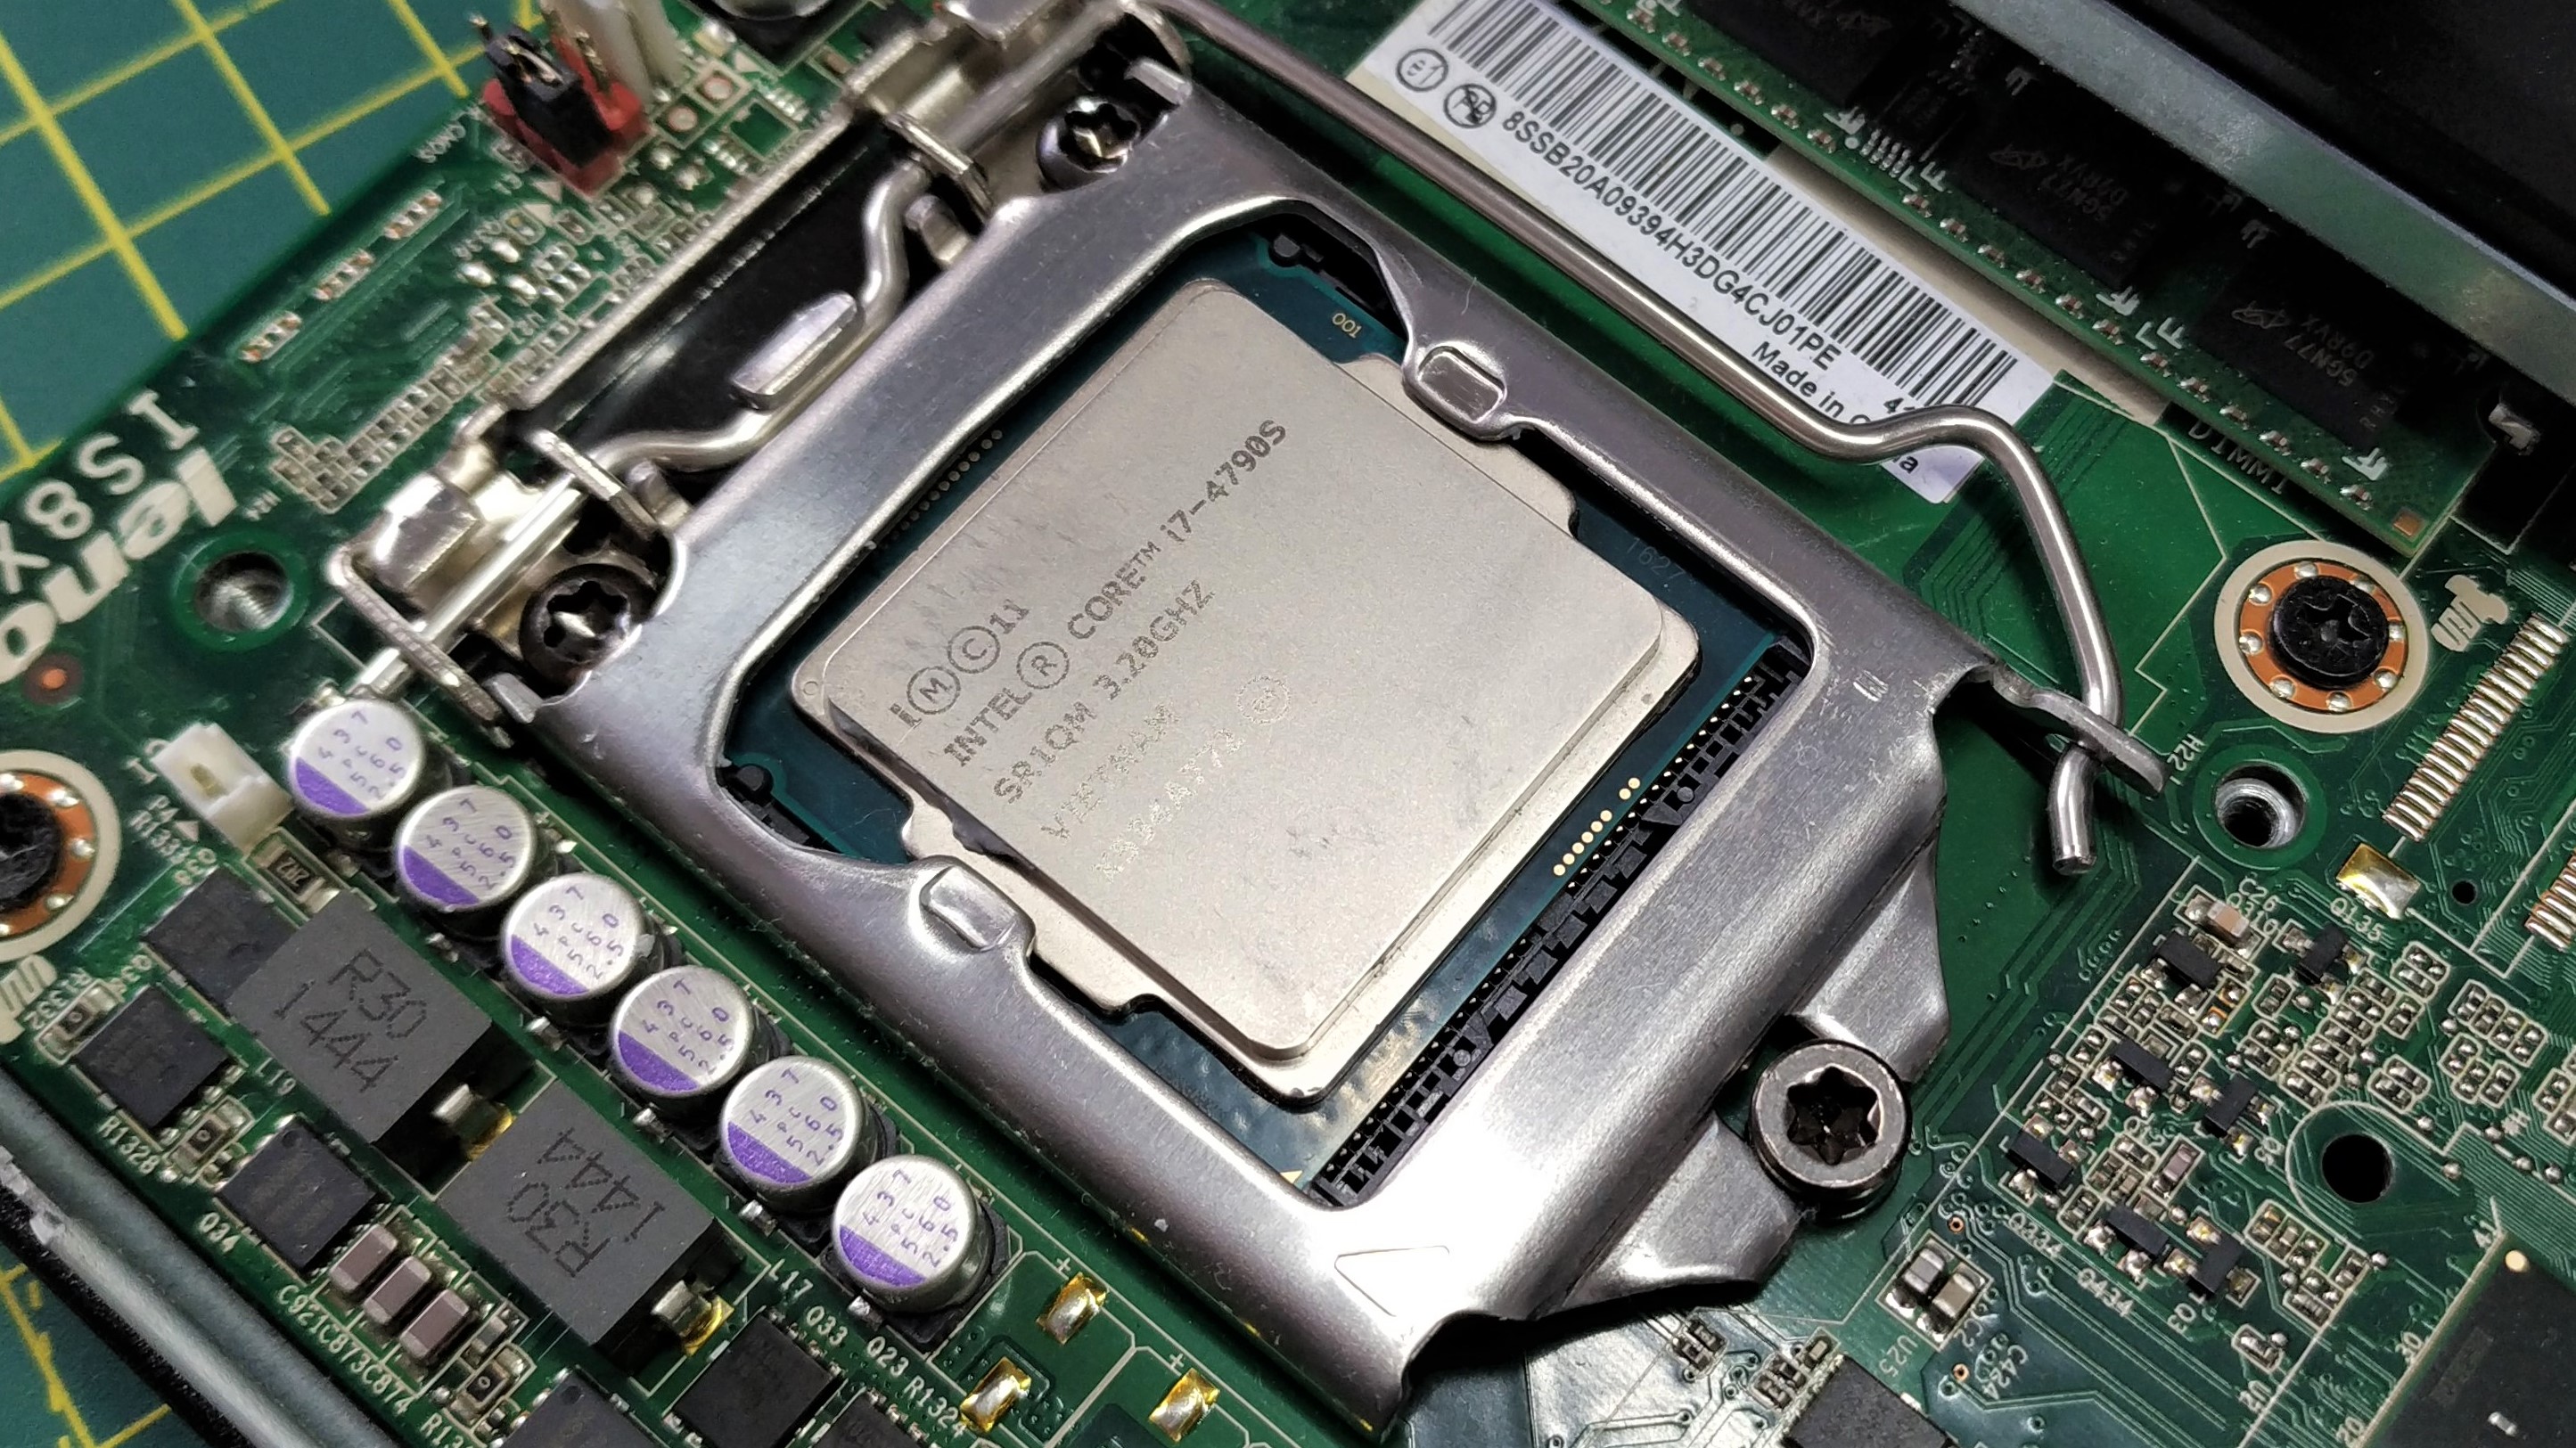 Thermal Paste Removal